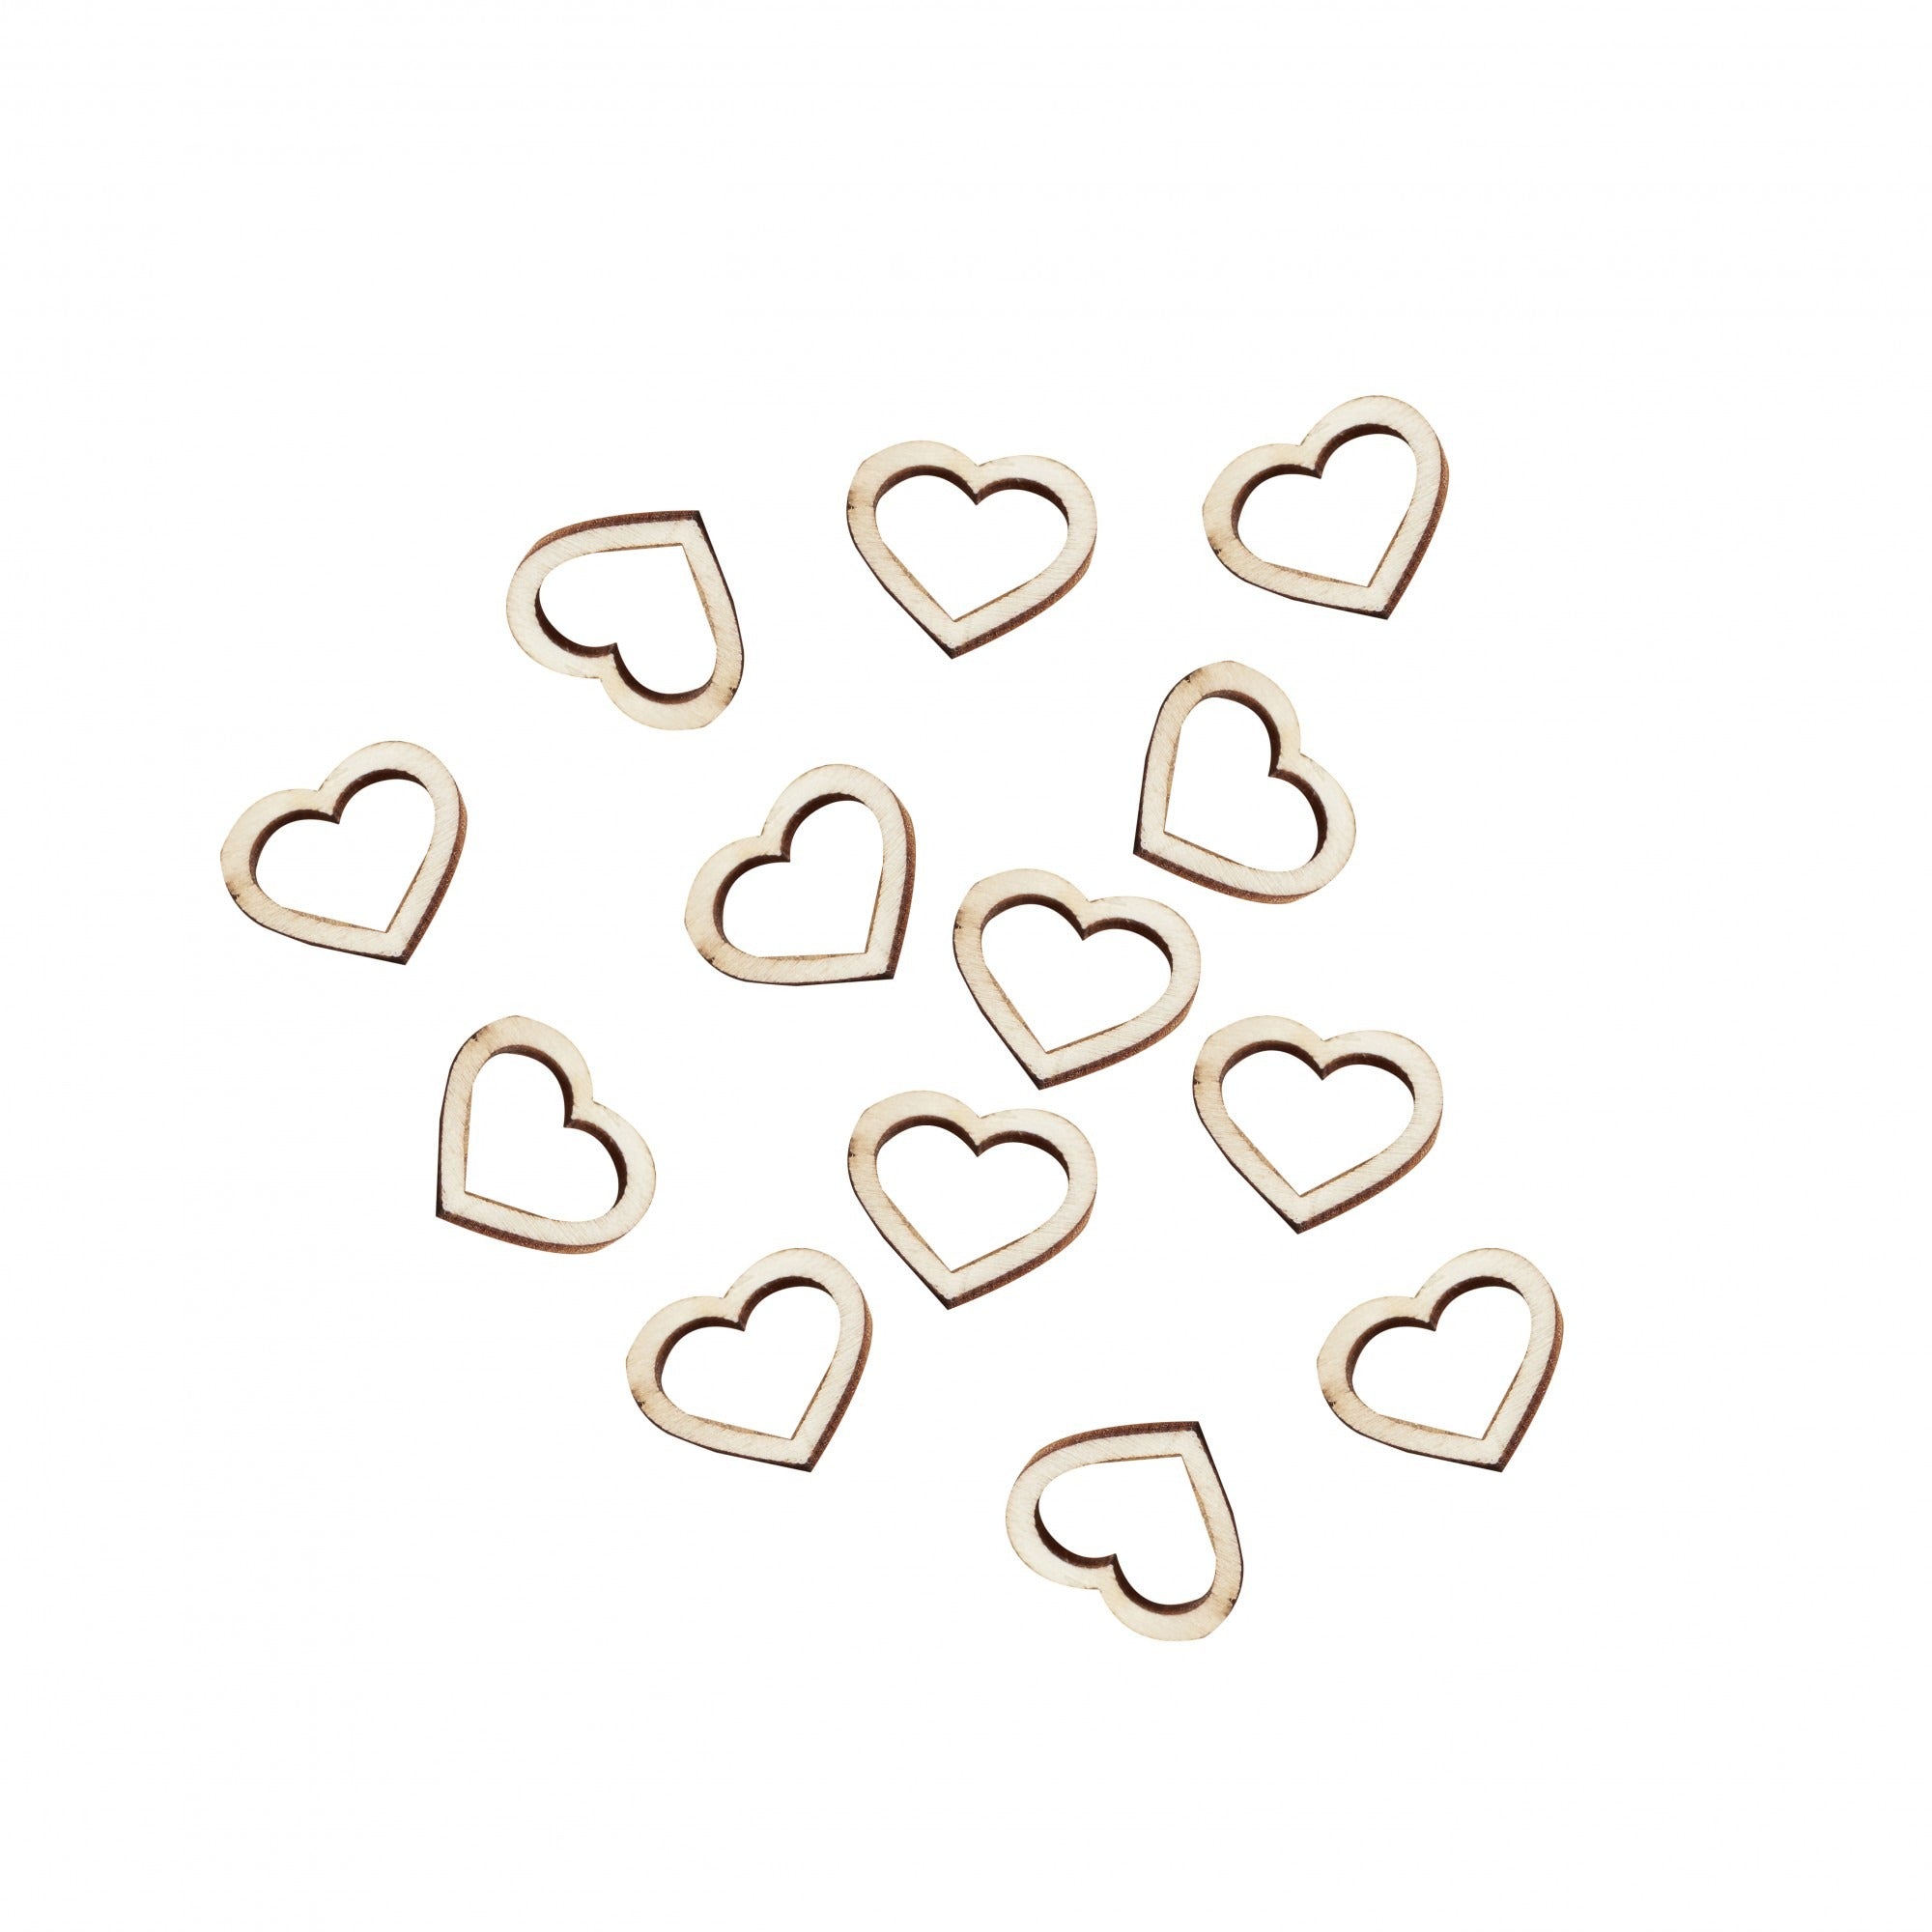 View Wooden Heart Table Confetti information